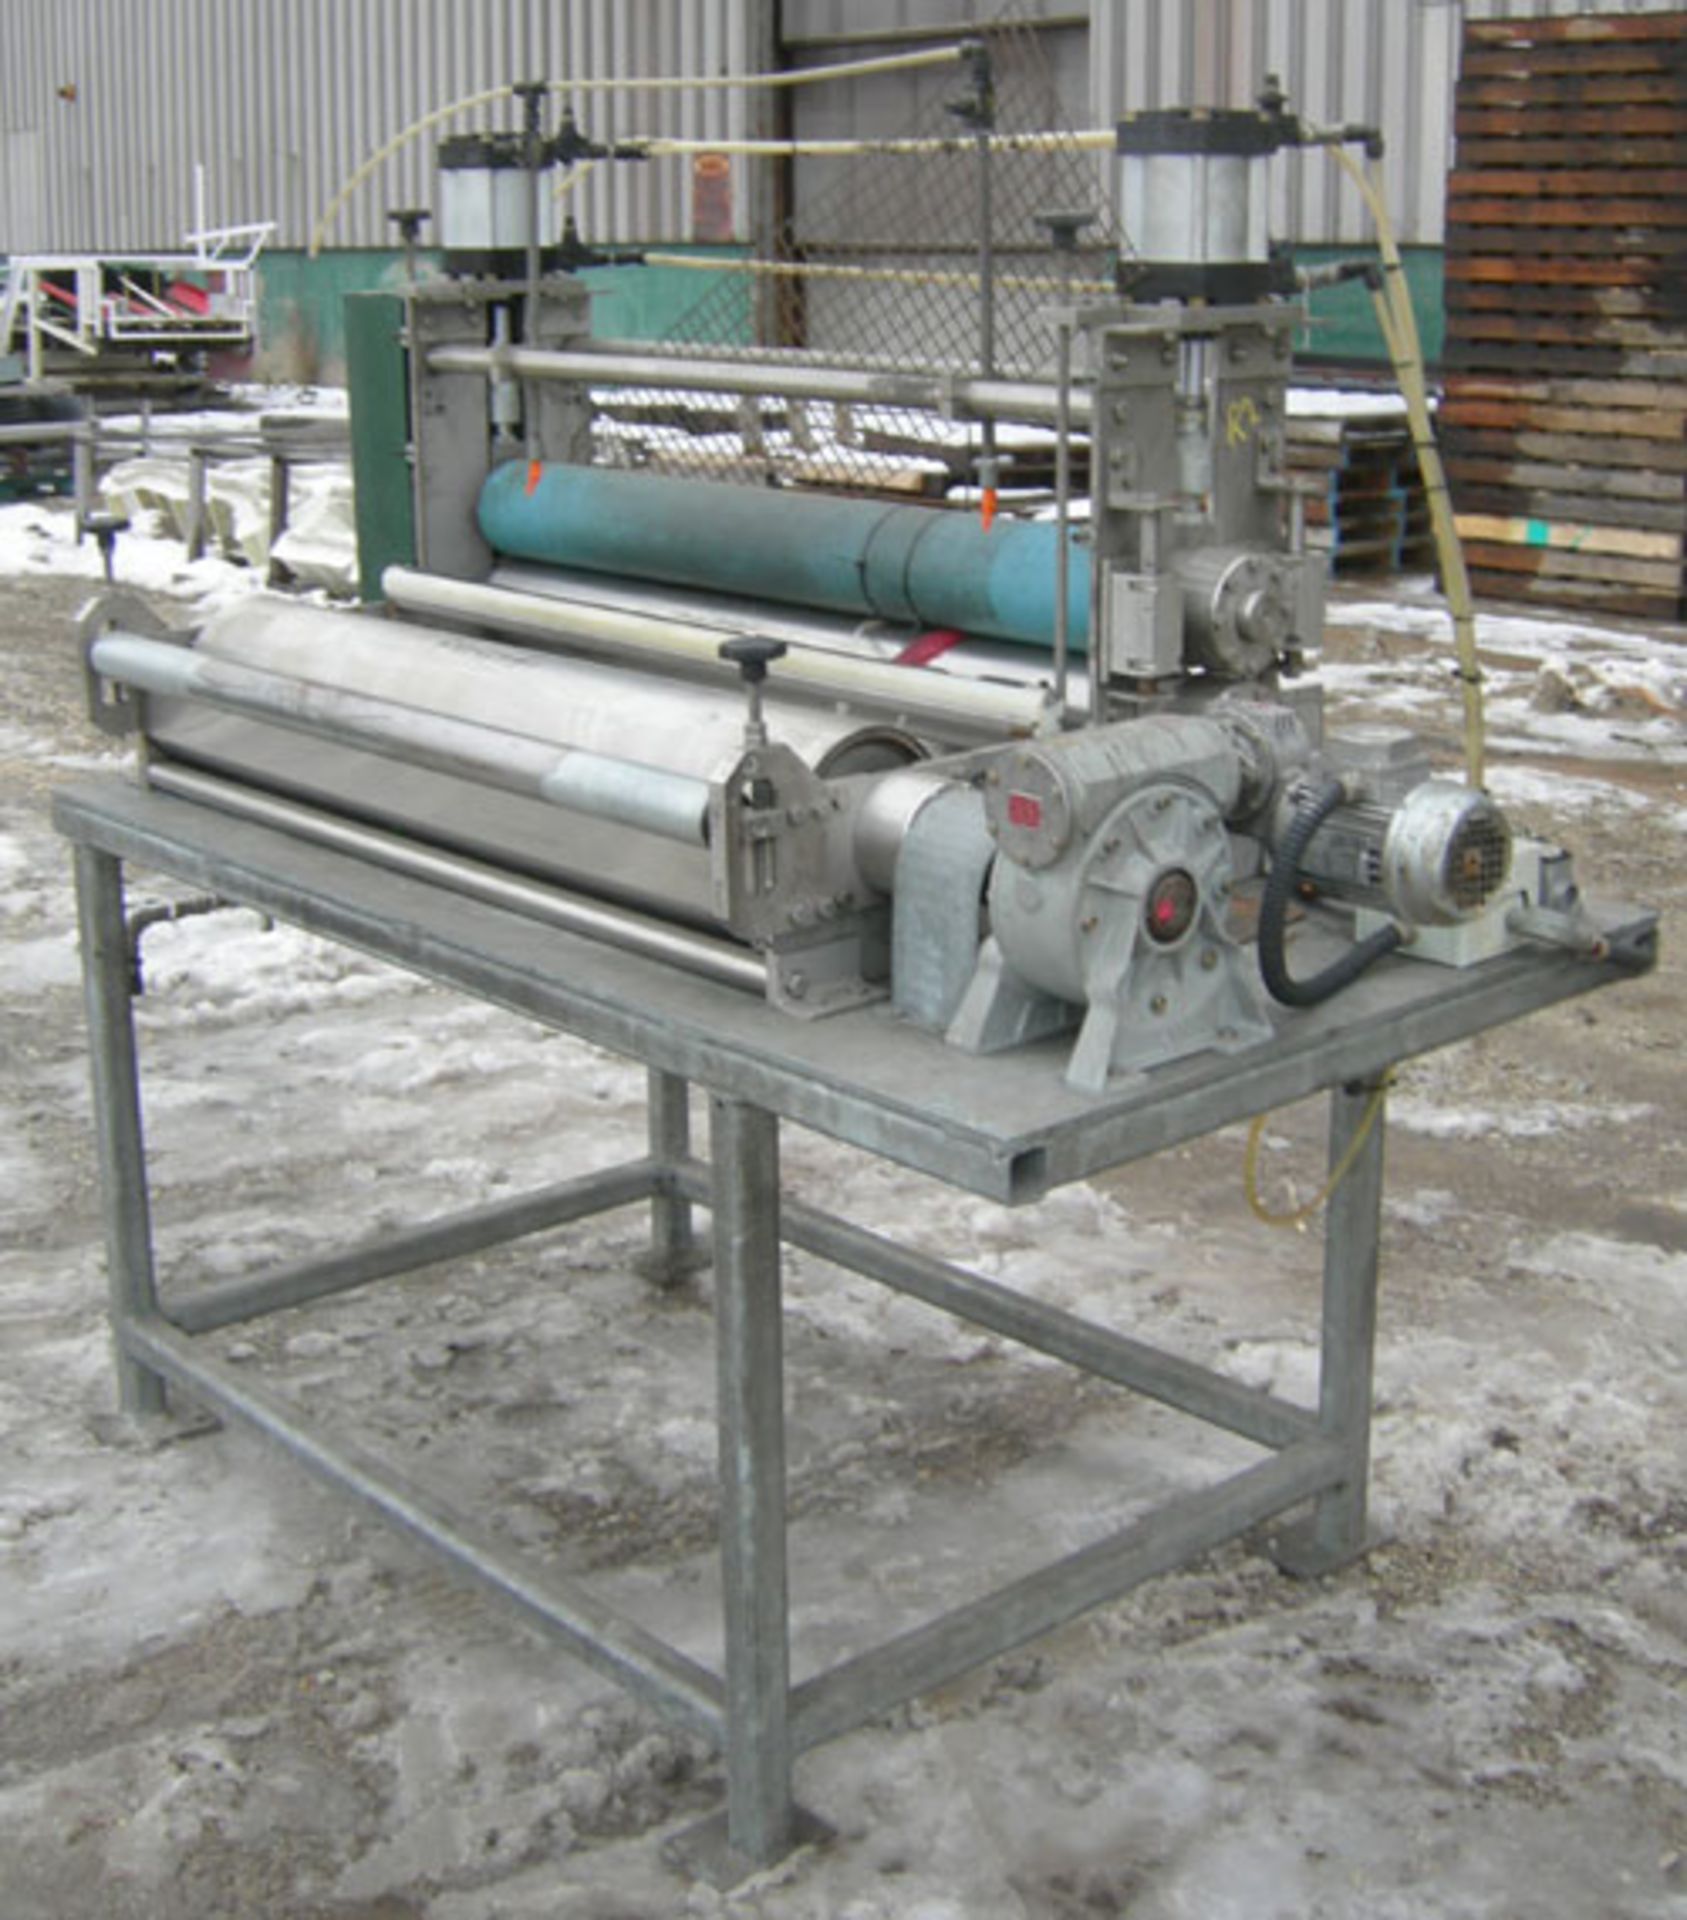 OMV 3-Roll Sheet Stack - Image 10 of 30